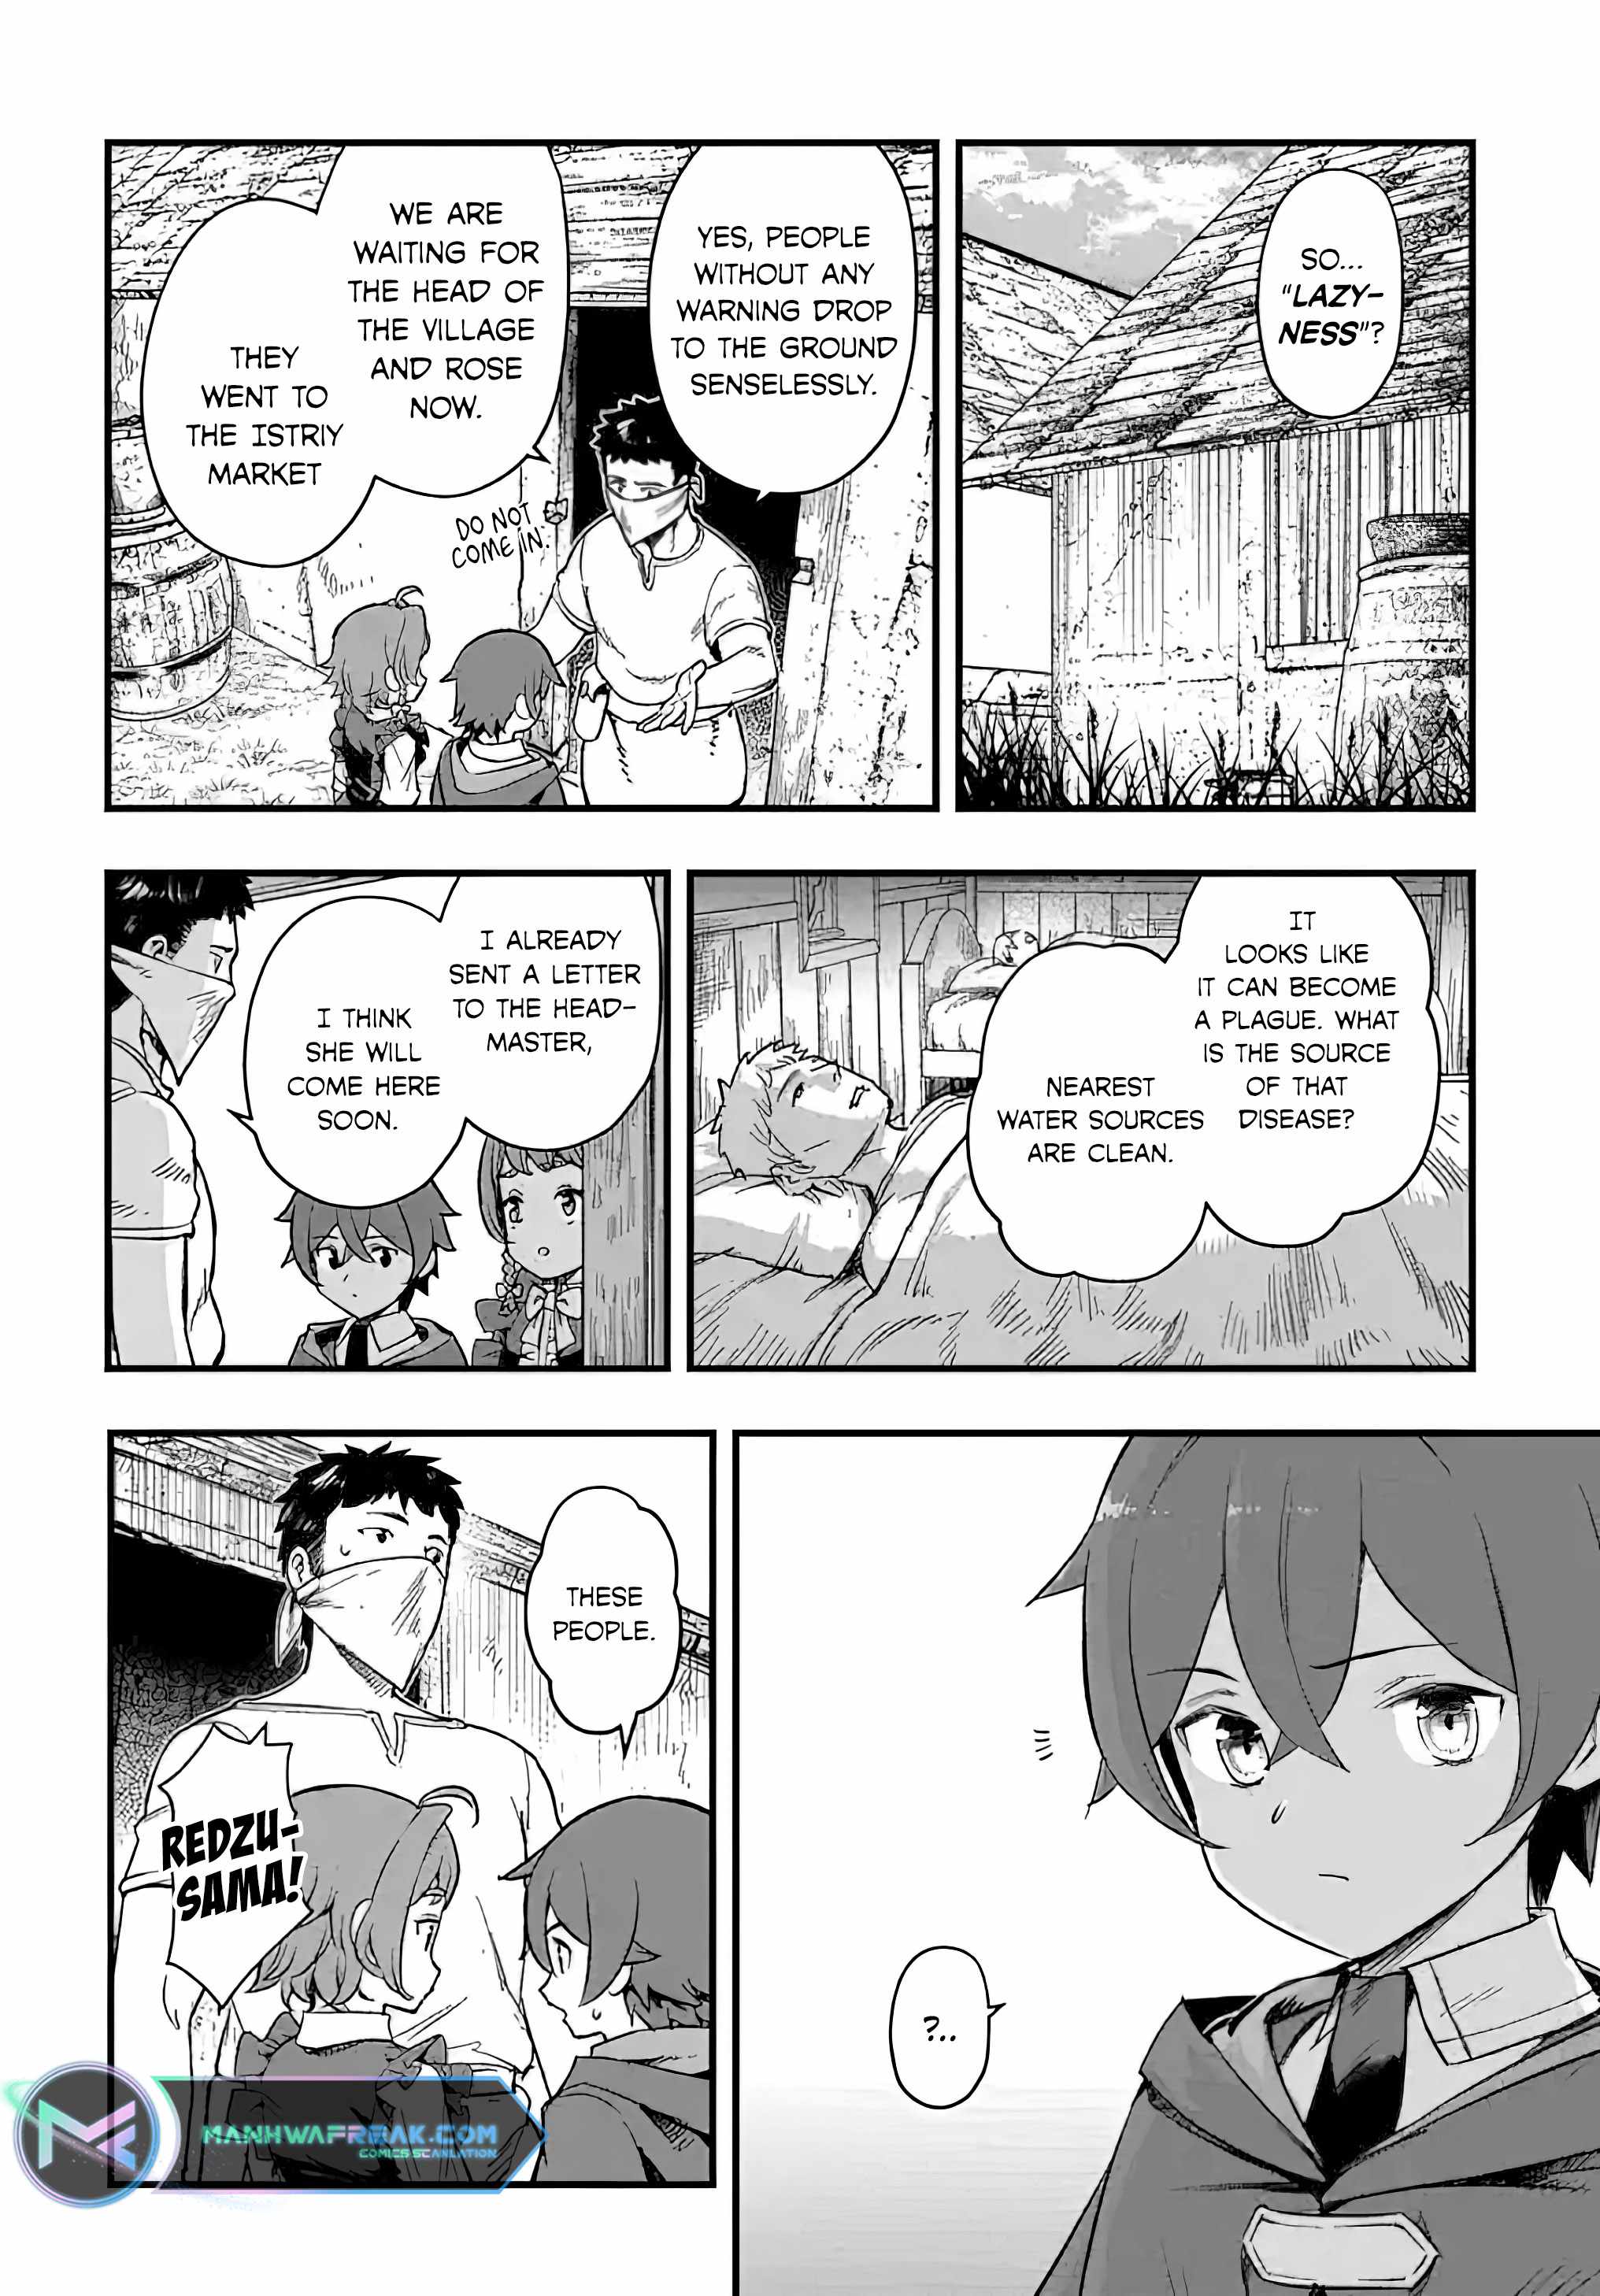 Magic Maker: How to Create Magic in Another World Chapter 13-1-eng-li - Page 3